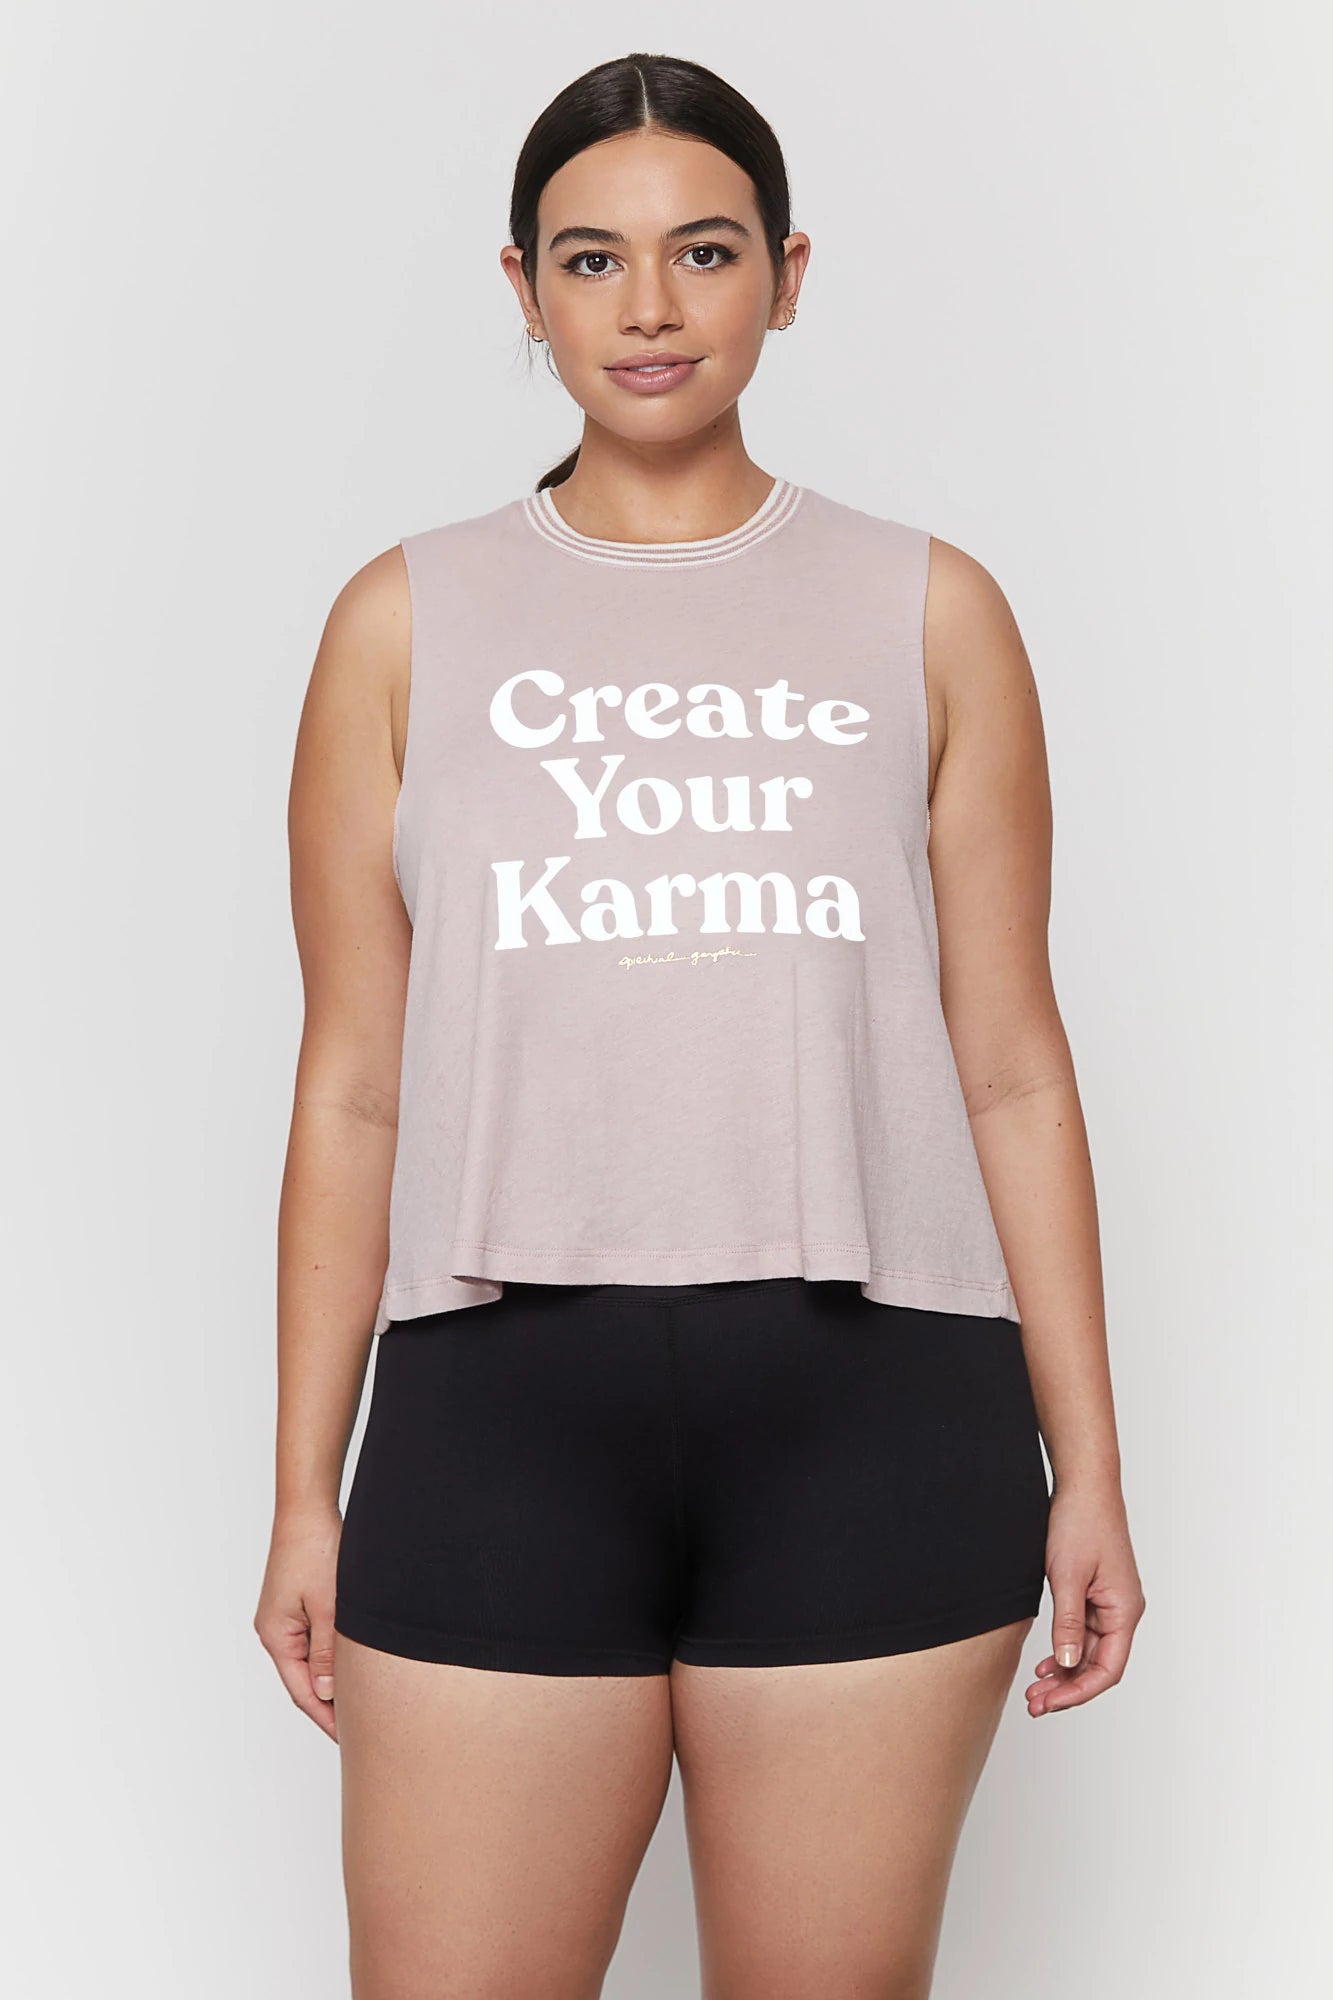 Once you crop, it’s hard to stop – we get it, and we’ve got you. In soft cotton blend jersey with a bold new graphic, our Crop Tank features raw edge details and slightly dropped armholes for added breathability and a laid-back vibe. It’s designed with a subtle cropped length for easy styling, but still long enough to provide core coverage for all the ways you move.